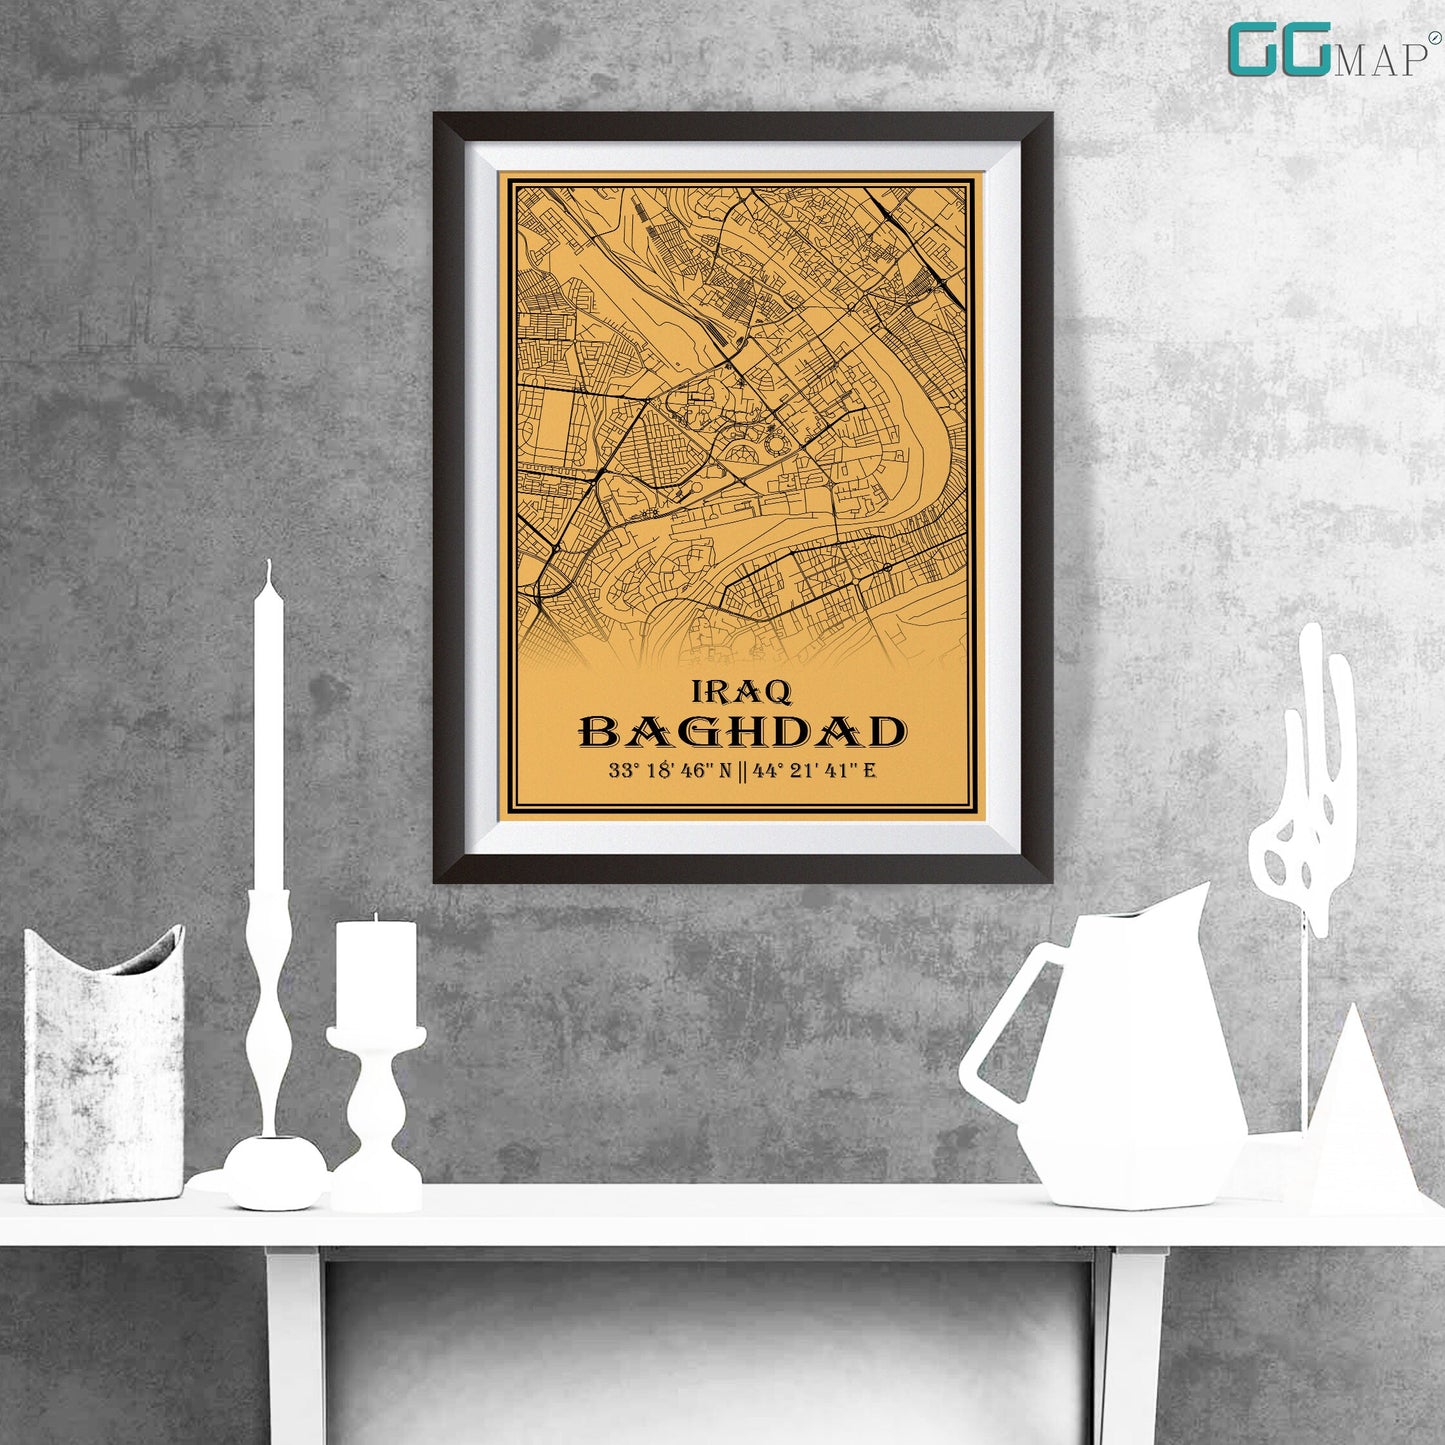 City map of BAGHDAD - Home Decor - Office map - Travel map - Print map - Medallion yellow map - Baghdad map - Map art - Iraq